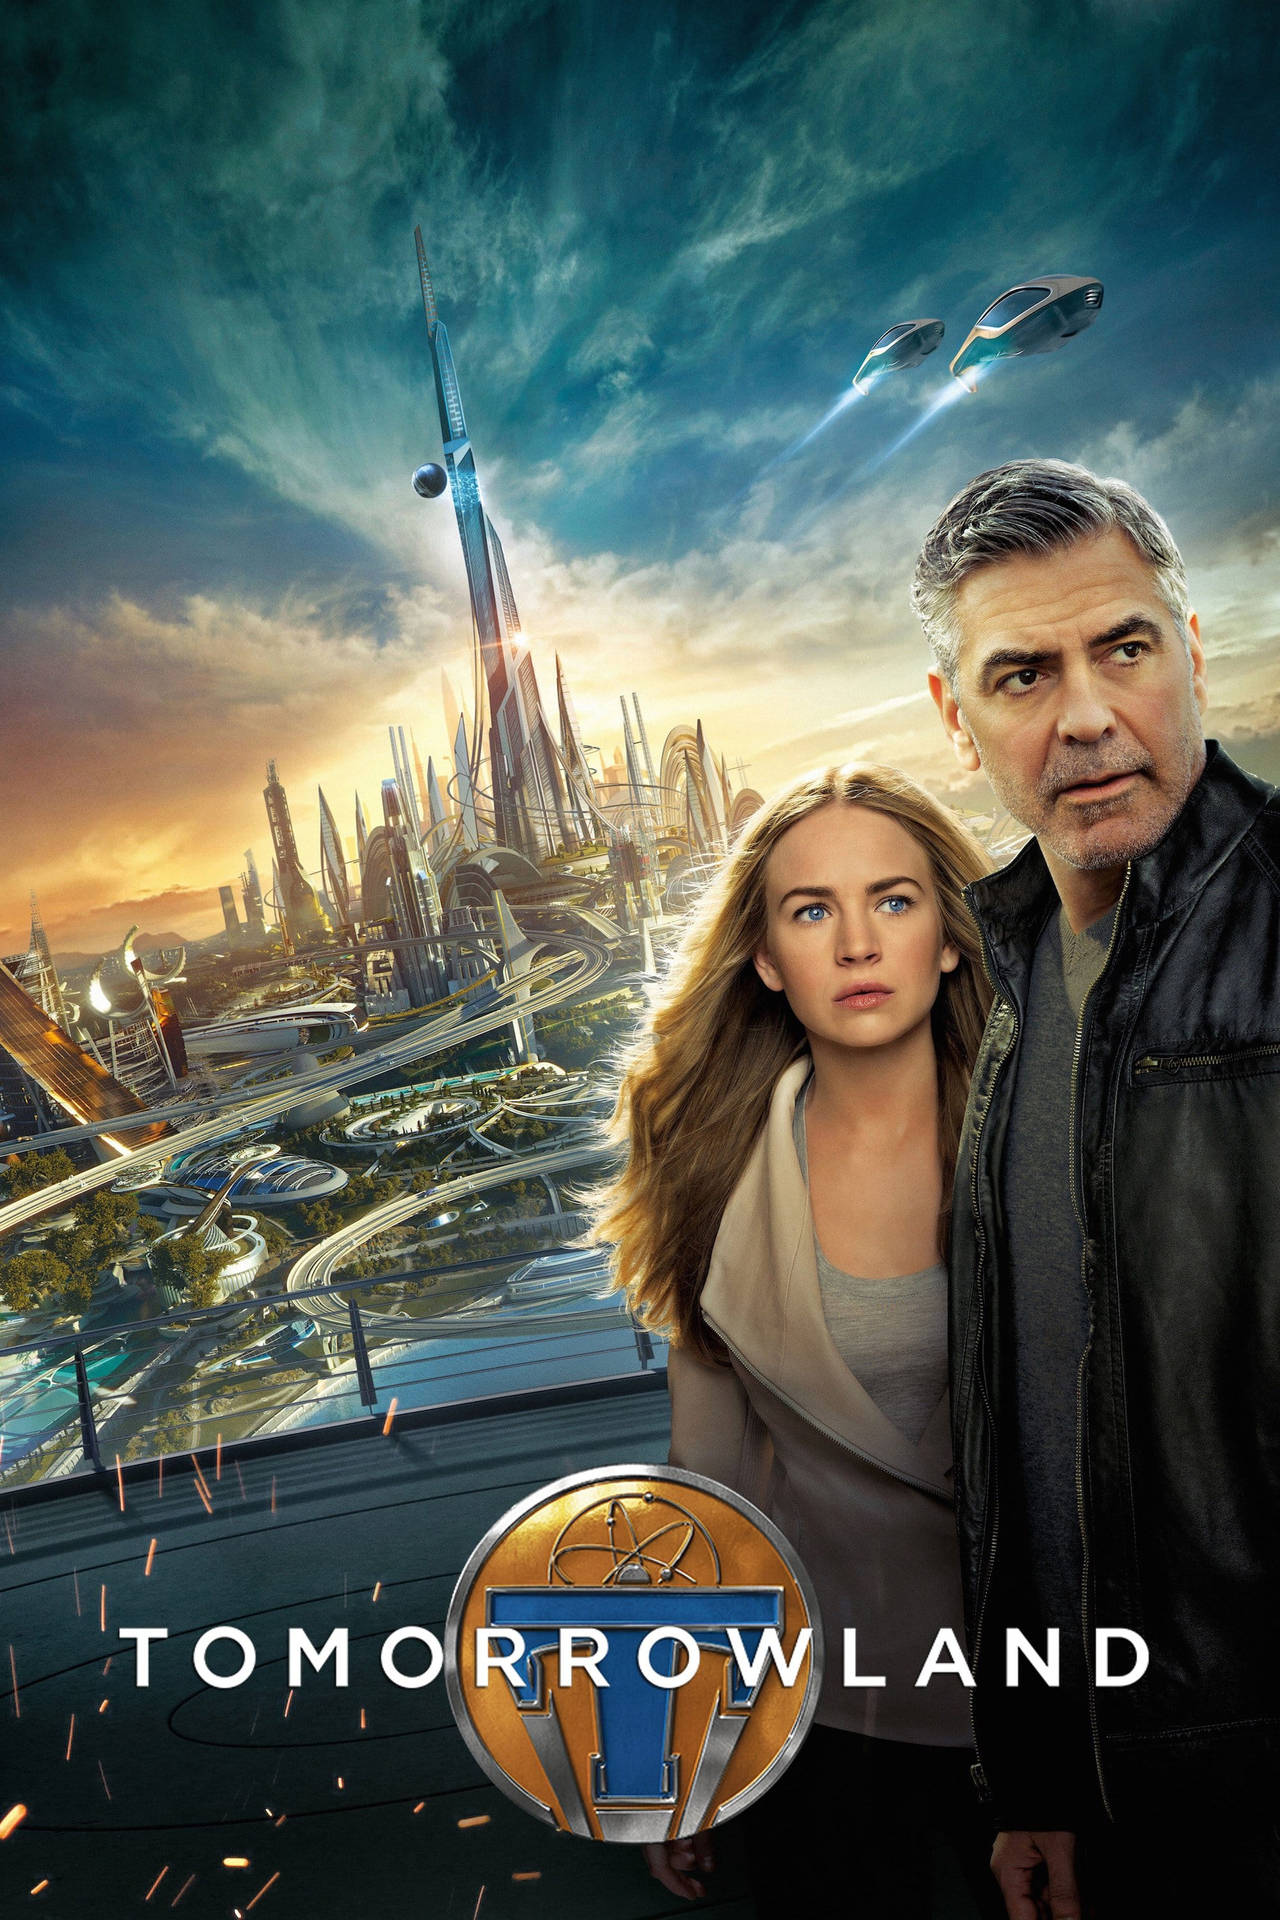 Tomorrowland Movie Poster With Futuristic City Background